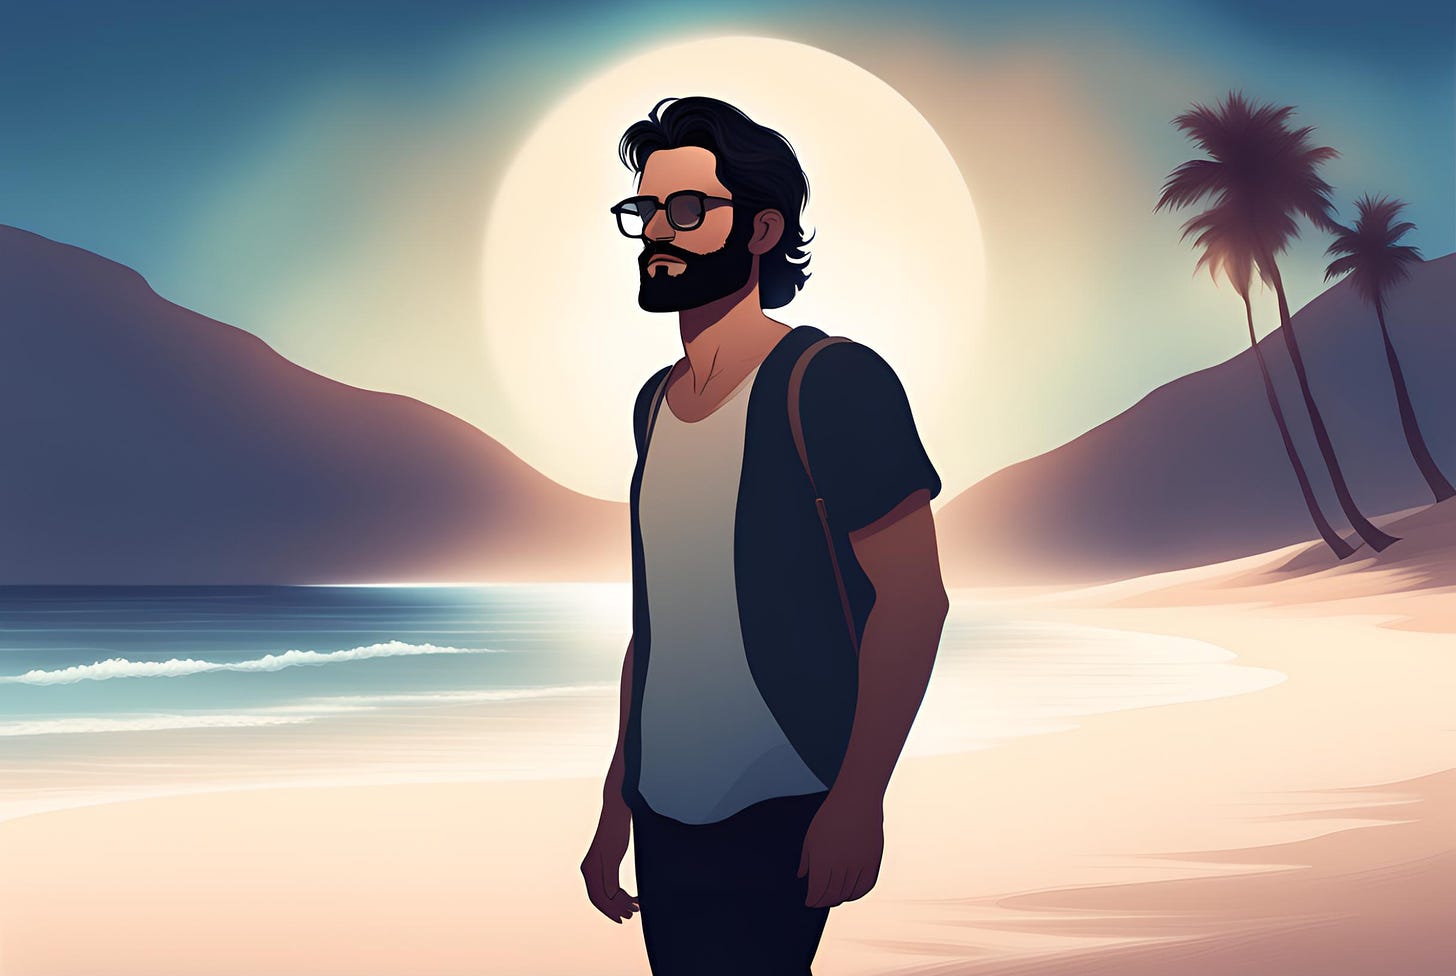 Illustration of a man walking alone on a white sand beach